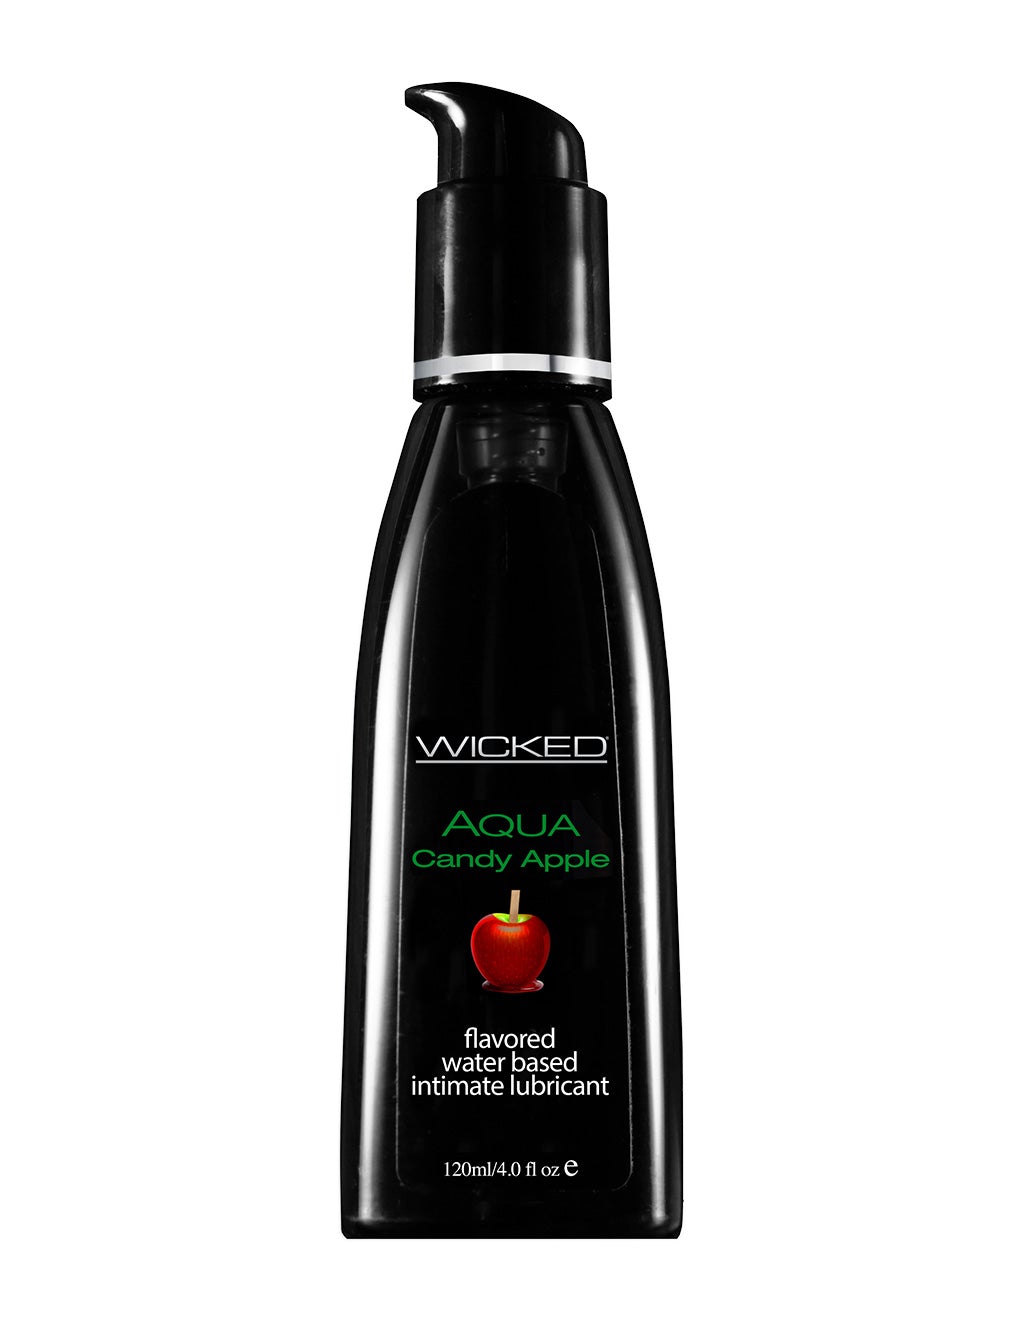 Wicked Aqua Candy Apple Water Based Person Lubricant. Slide 2